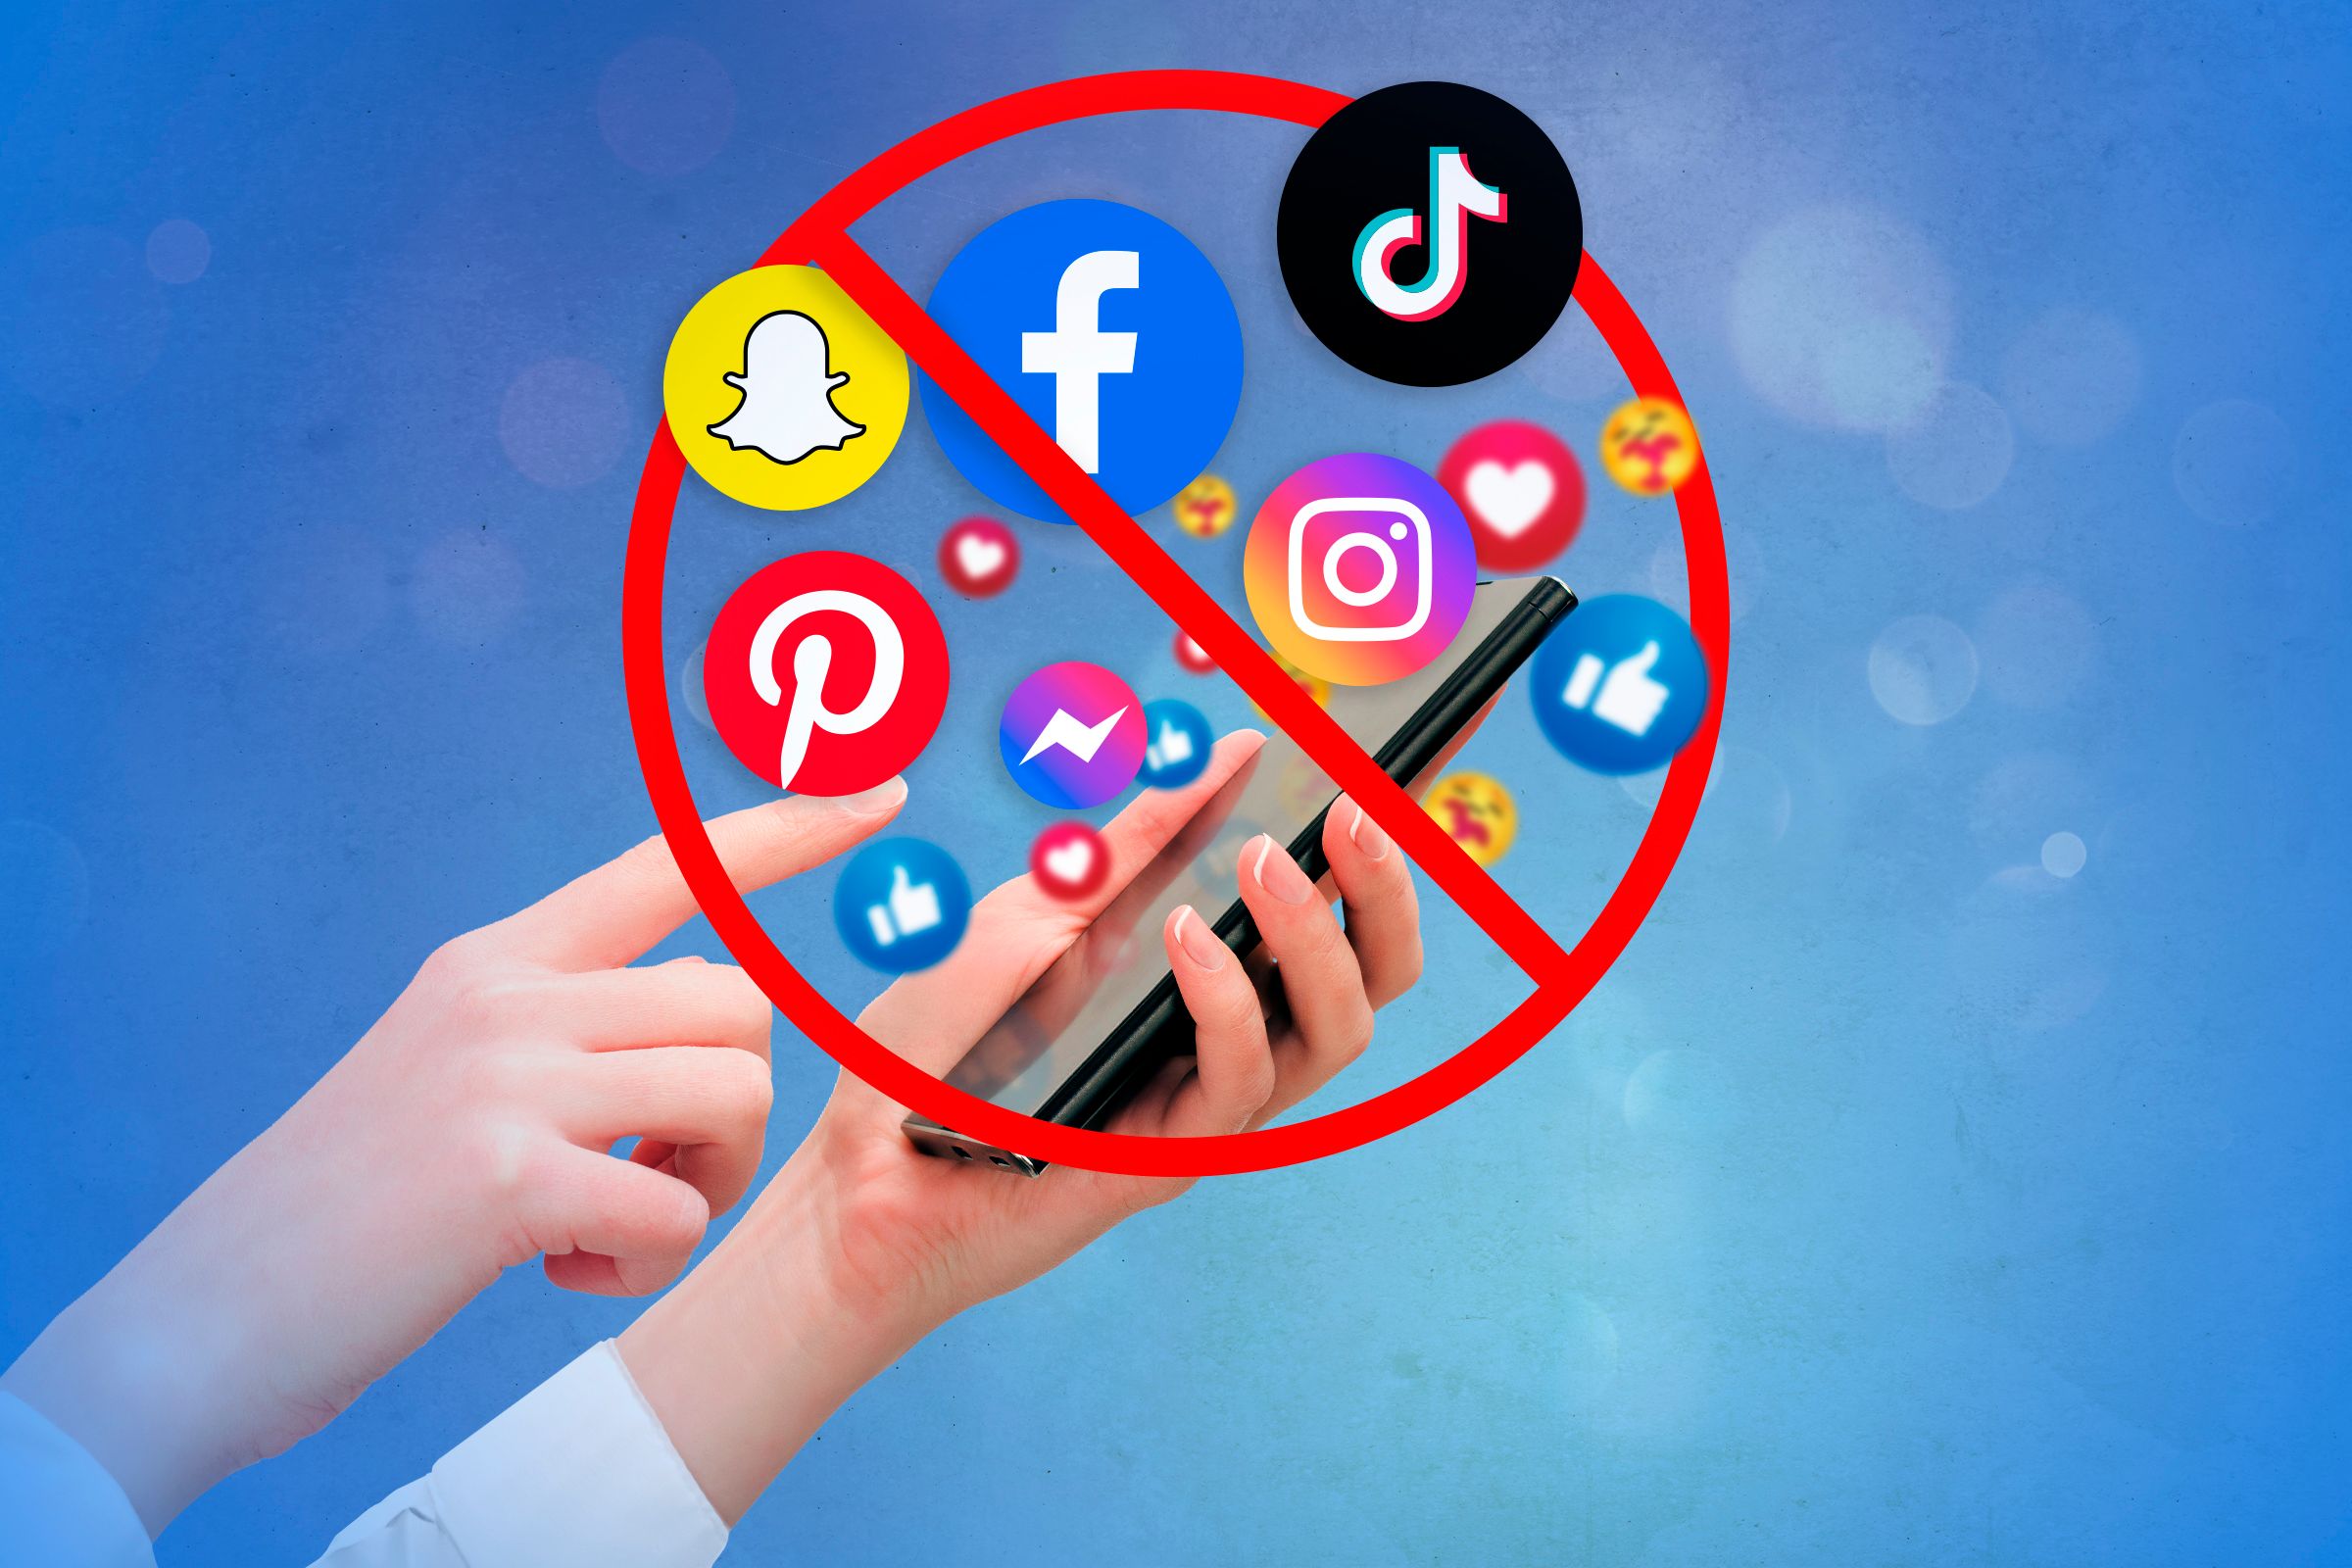 A hand holding a smartphone and a lot of emojis and social media symbols coming out of the smartphone with a prohibited symbol in front of them